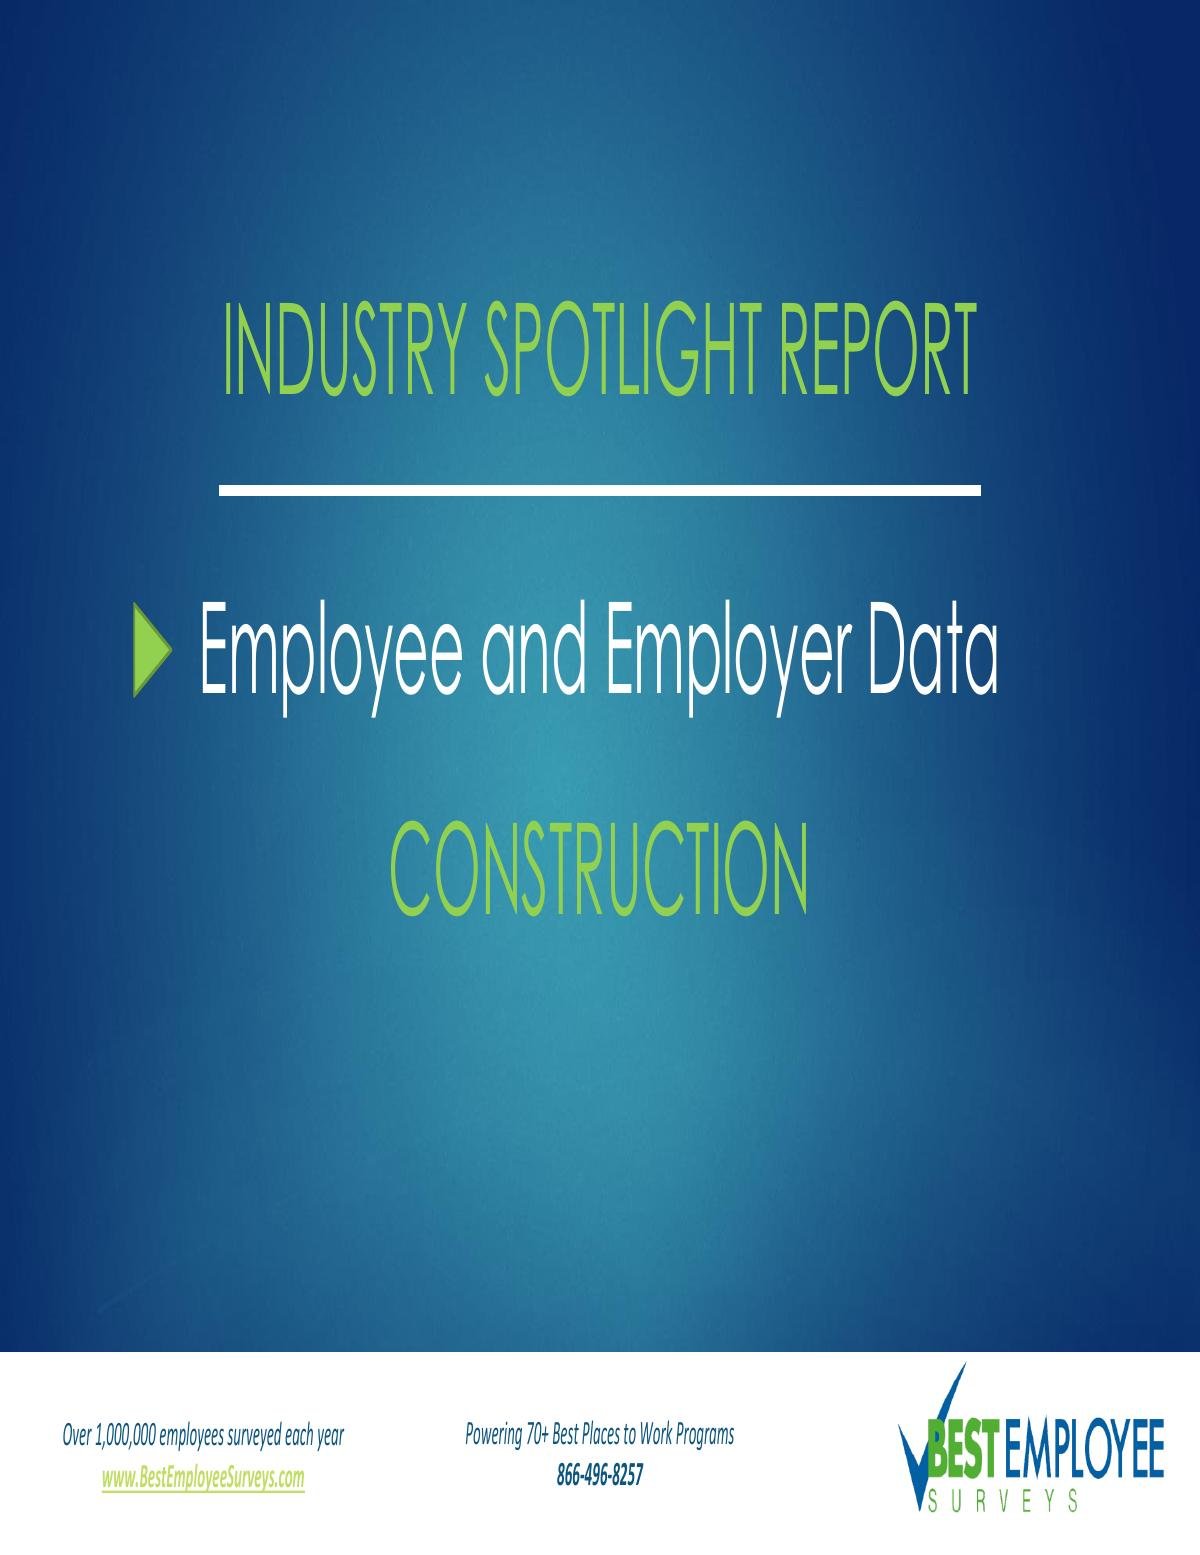 2019 Employee Engagement and Satisfaction Report: Construction